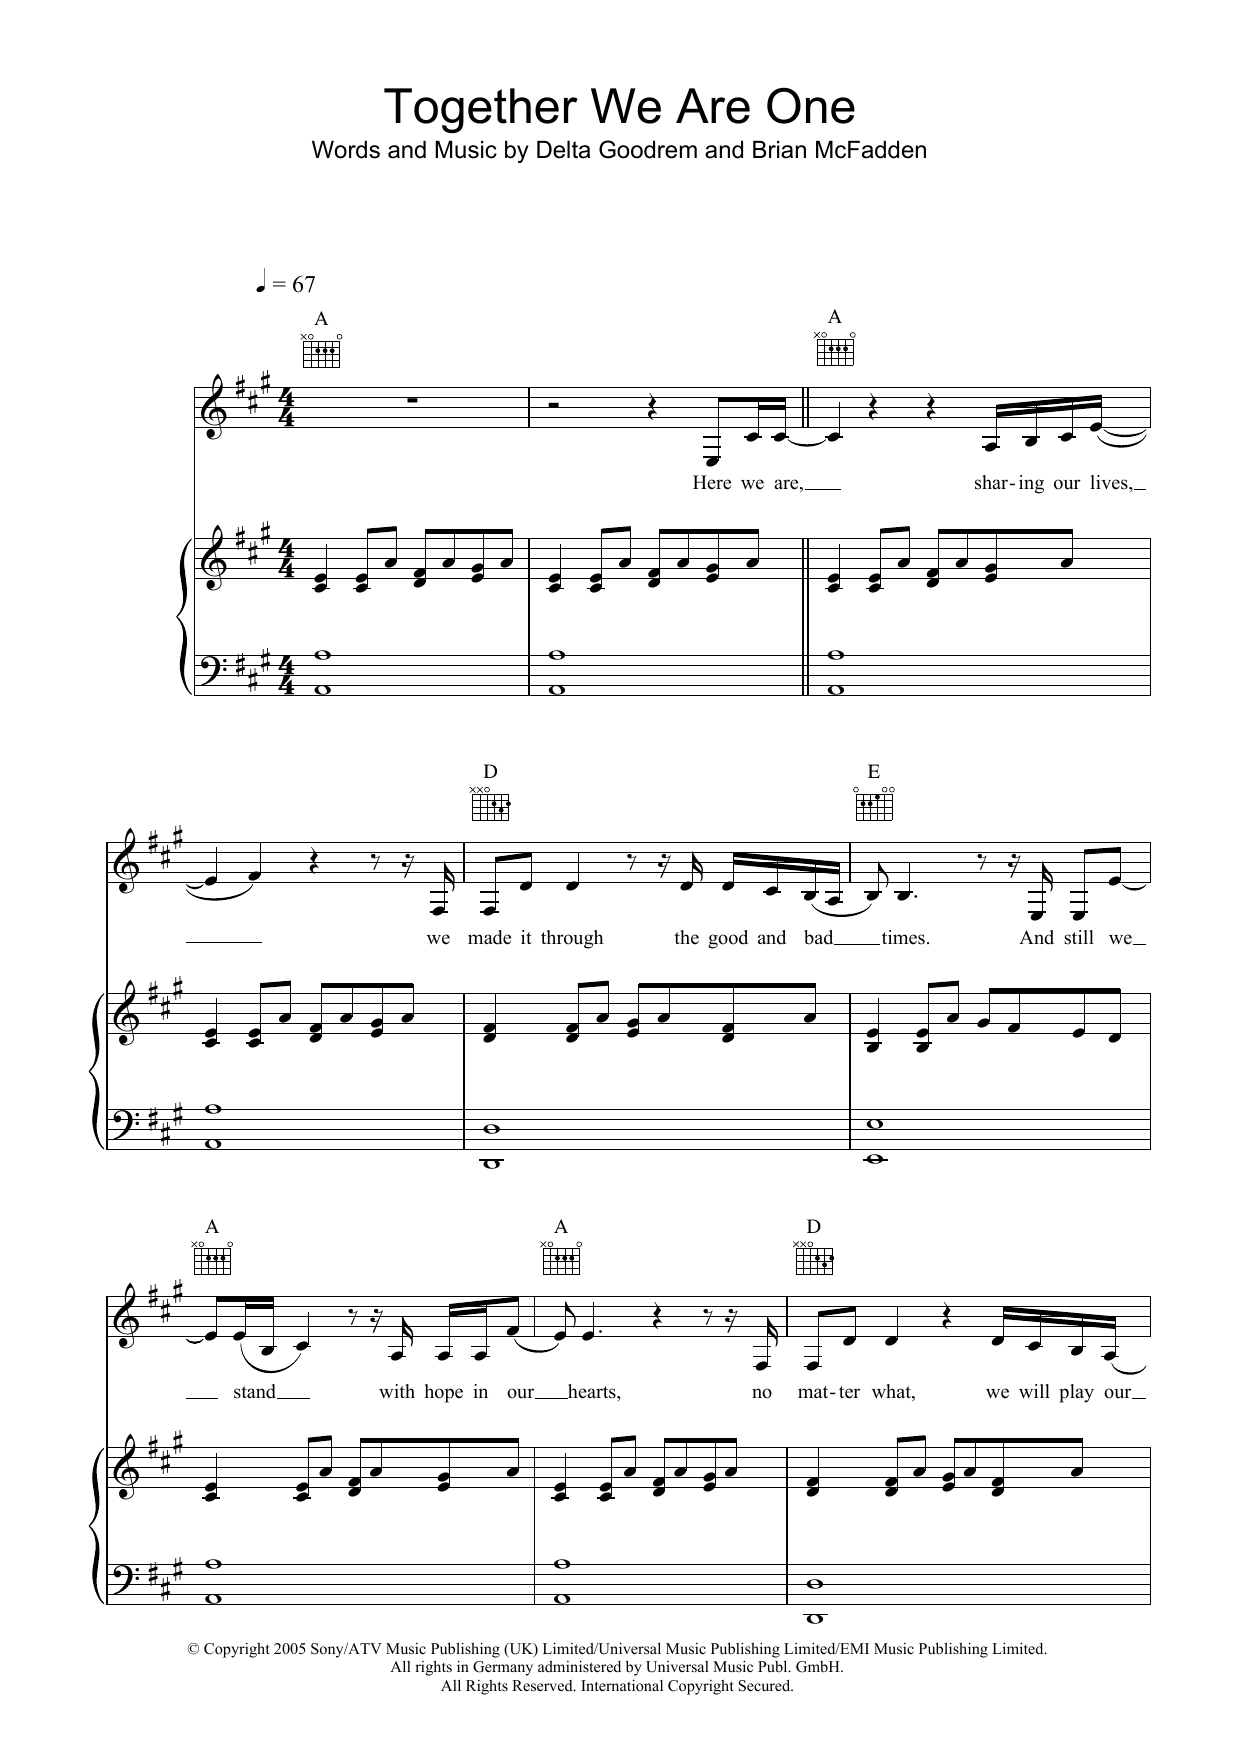 Delta Goodrem Together We Are One sheet music notes and chords. Download Printable PDF.